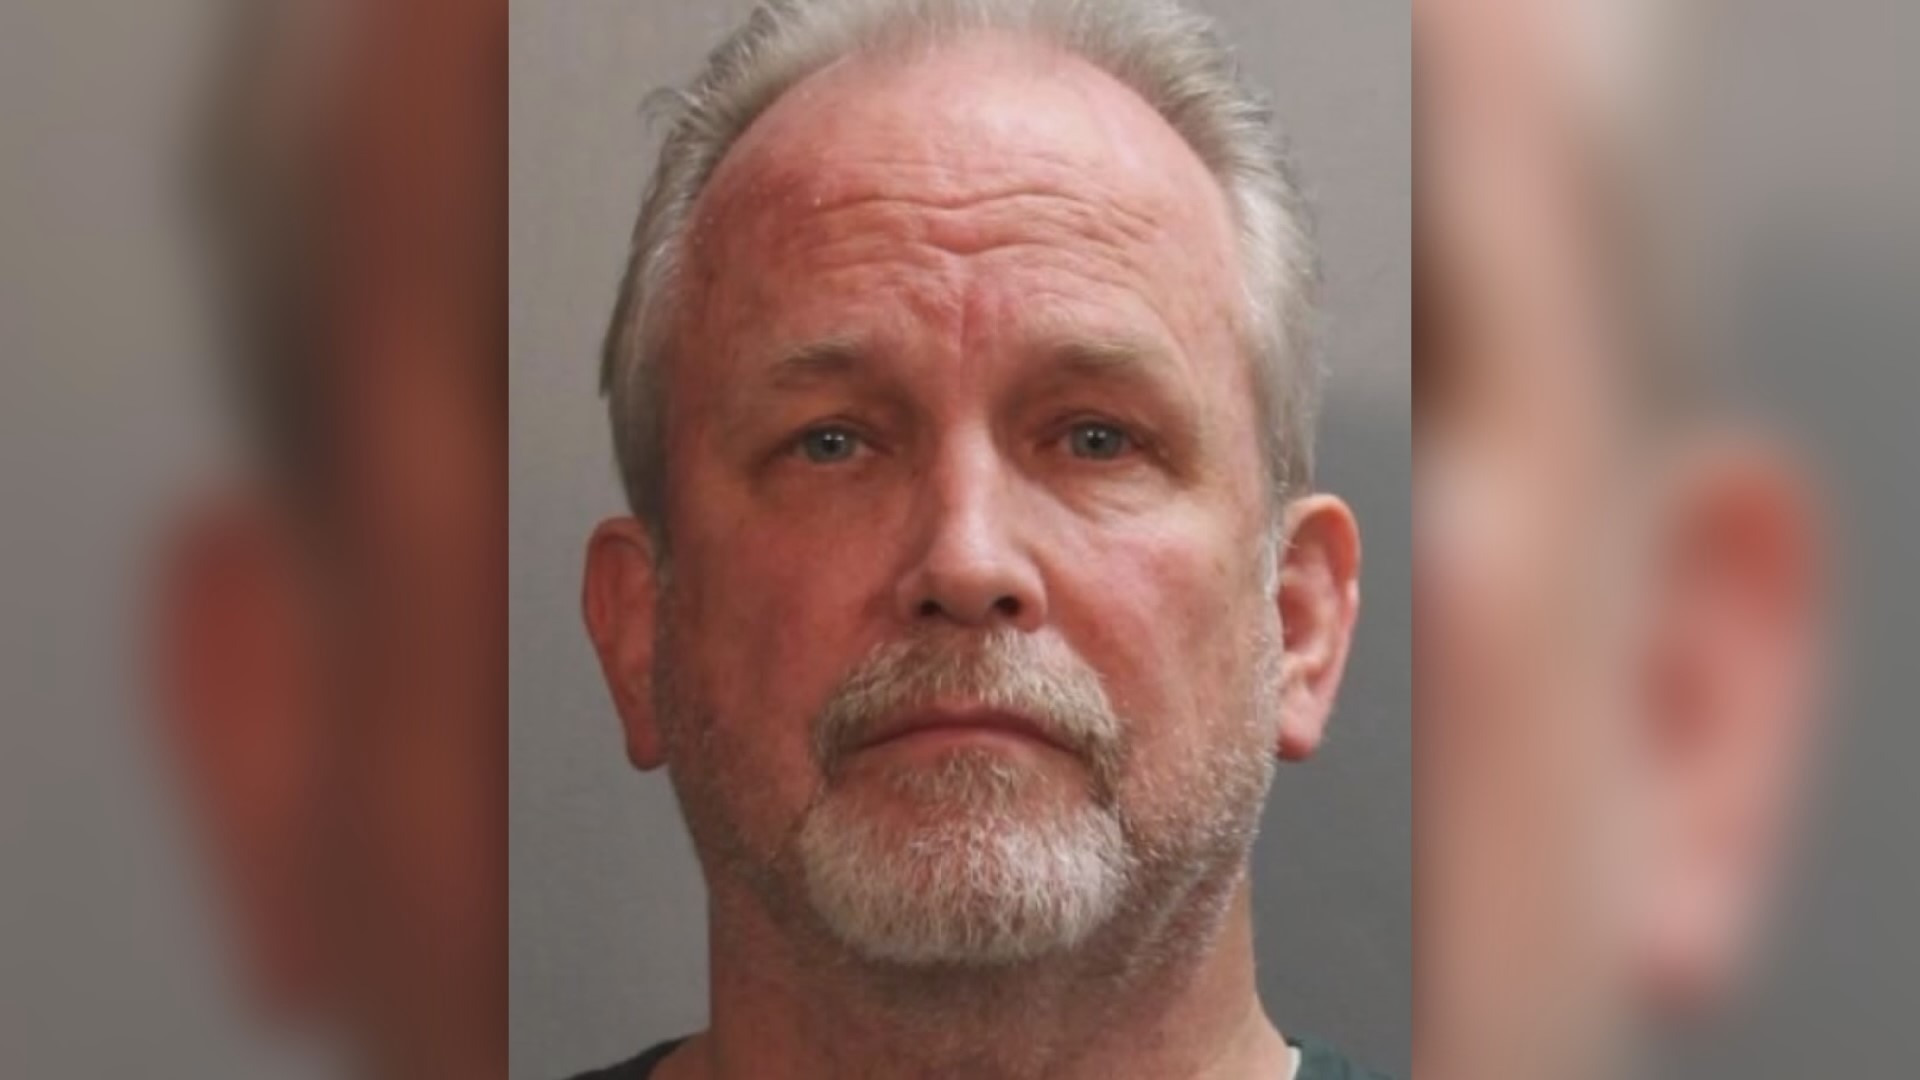 Clayton, 66, was arrested in March 2023 after the 16-year-old girl showed police records of about 1,700 texts between the two. His sentencing will be in June.